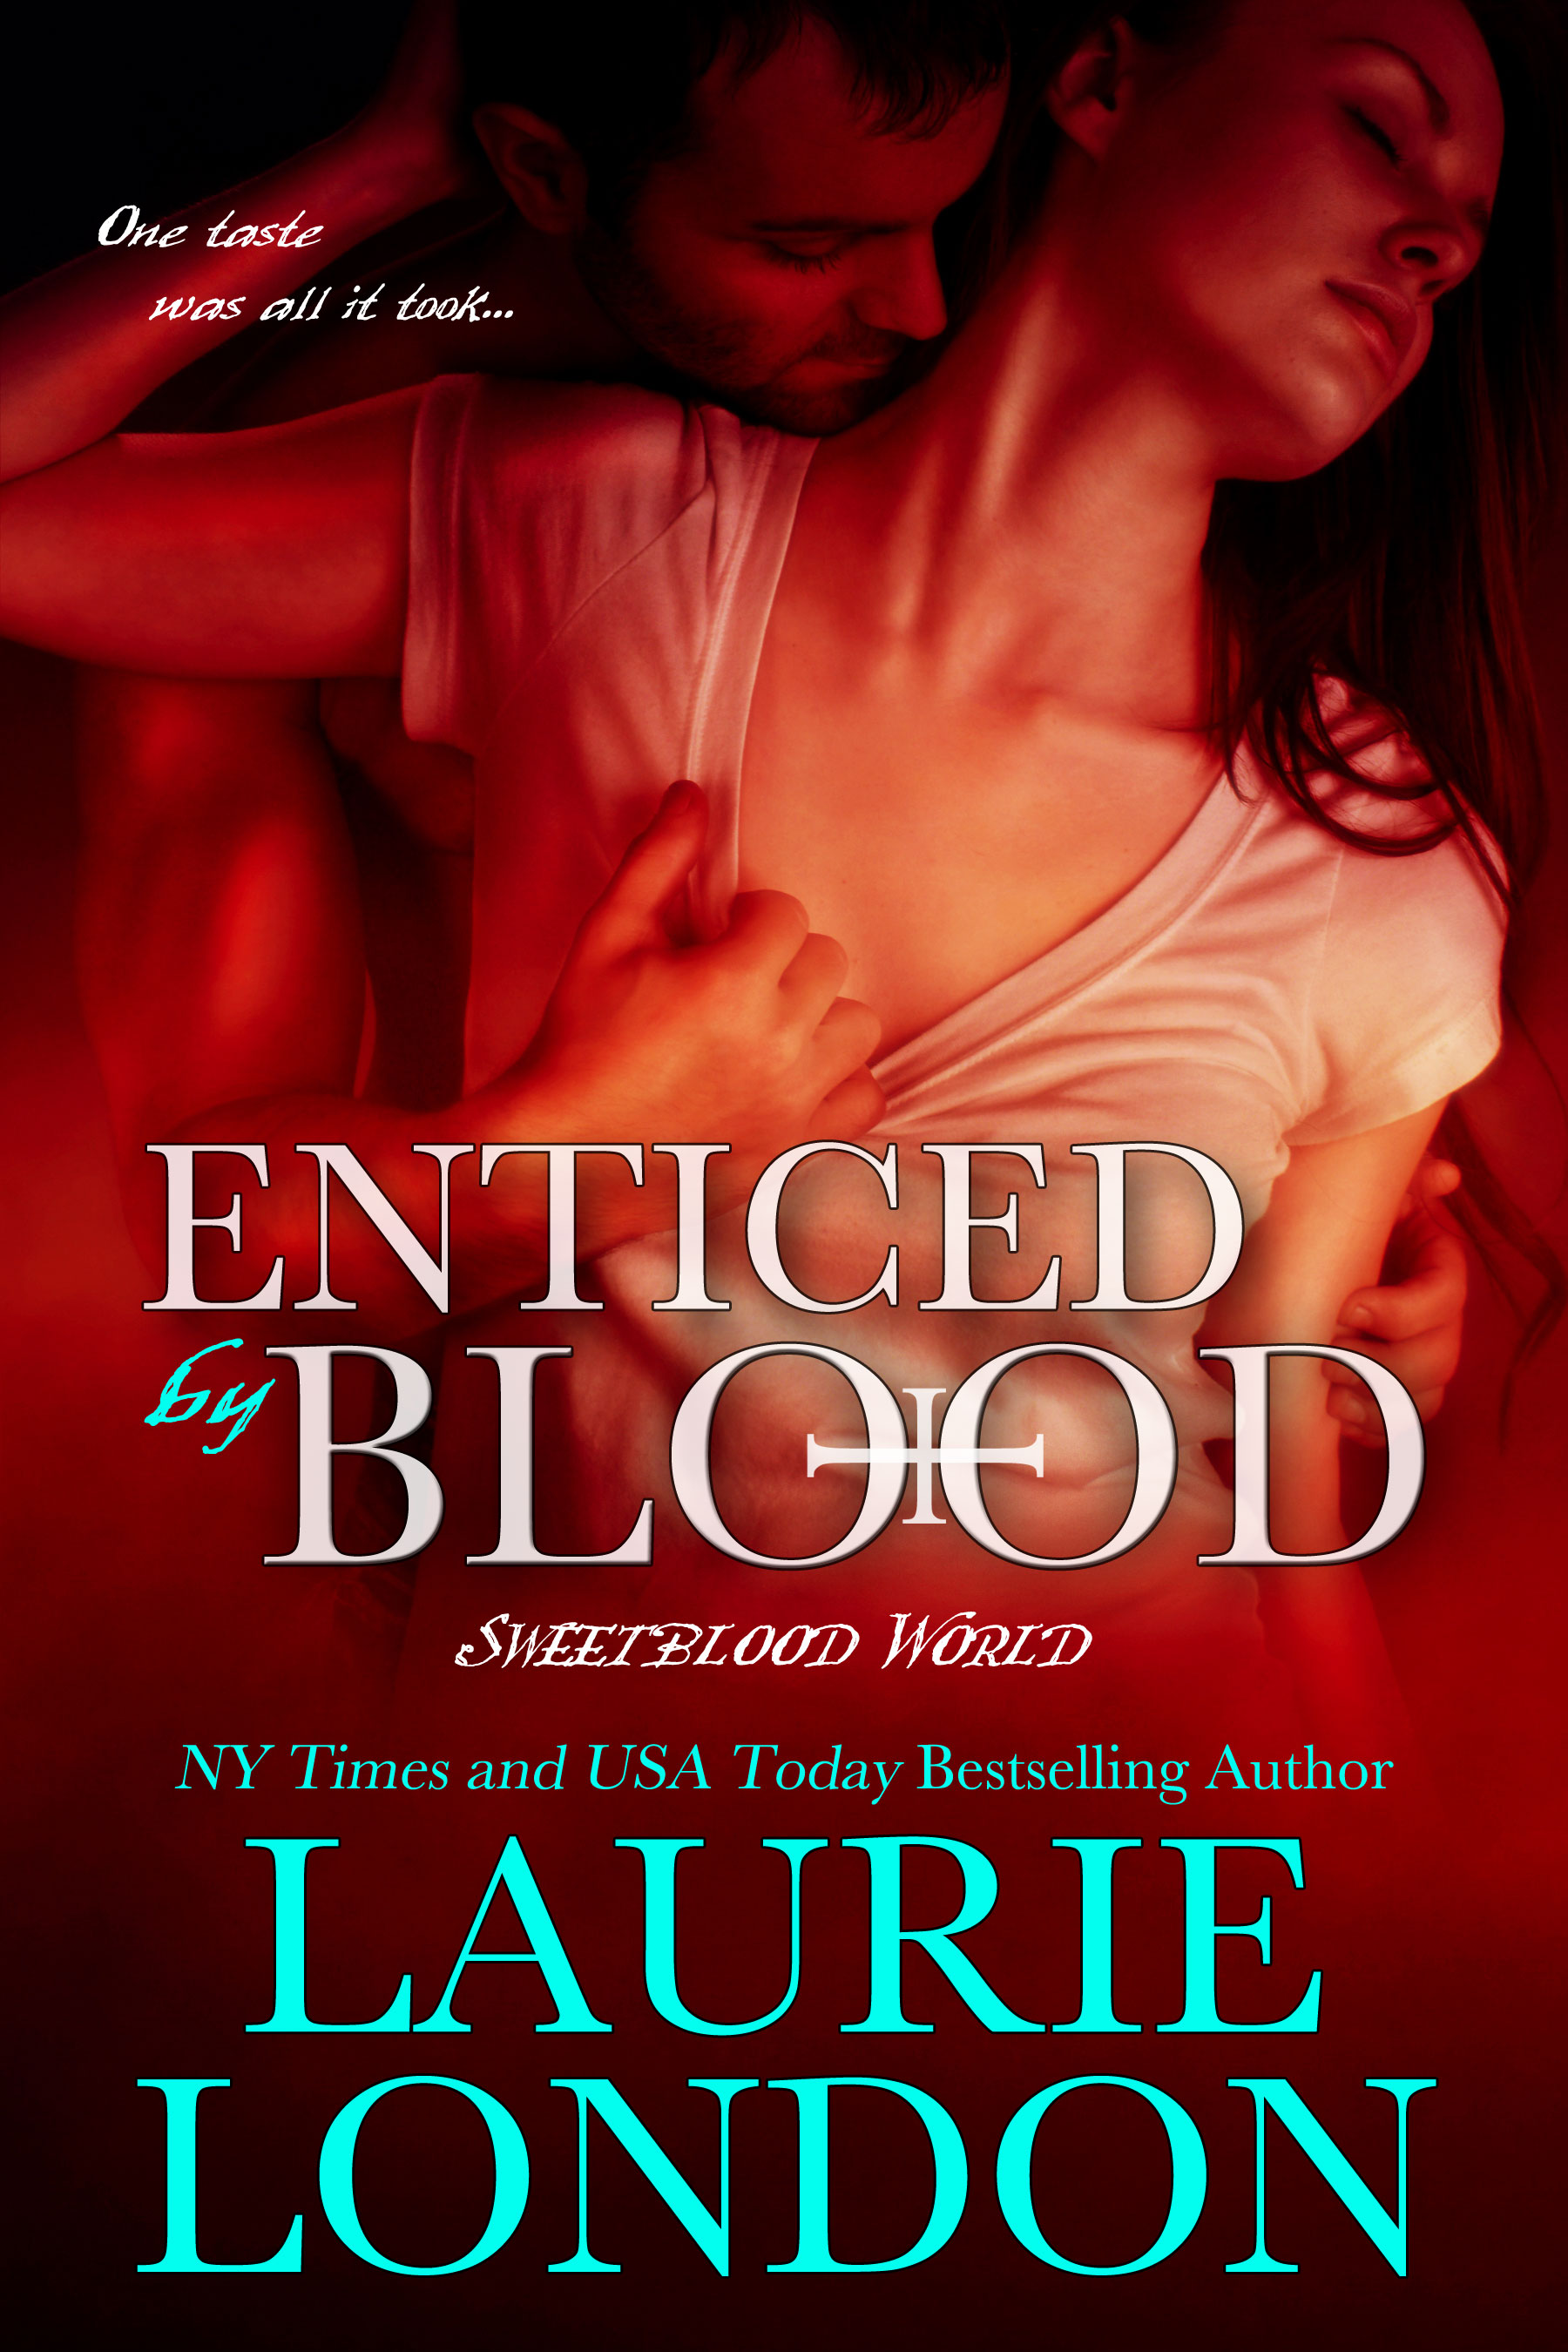 enticed by blood, vampire romance by laurie london